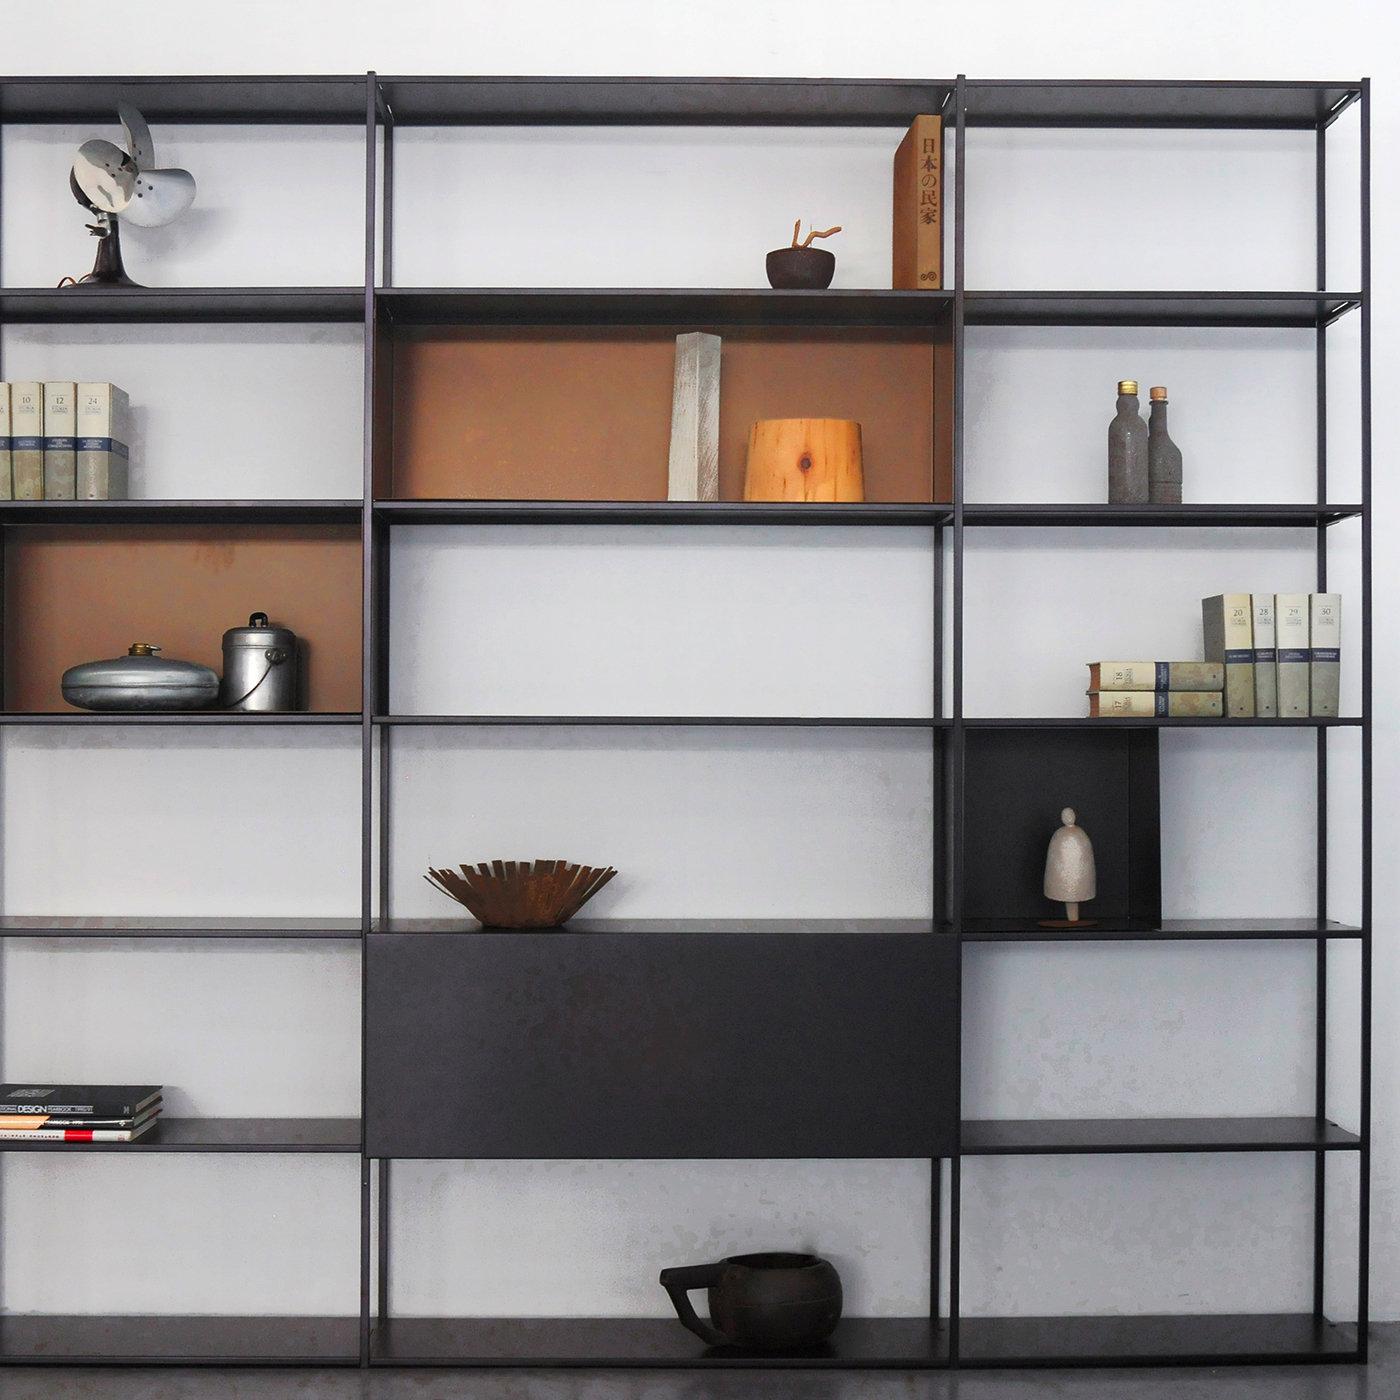 Covering an entire wall, the Easy Irony bookshelf comes complete with four boxes to provide a sense of movement and help store smaller objects. Thanks to the bookshelf's Minimalist vibe, your objects become the true focal point, allowing your